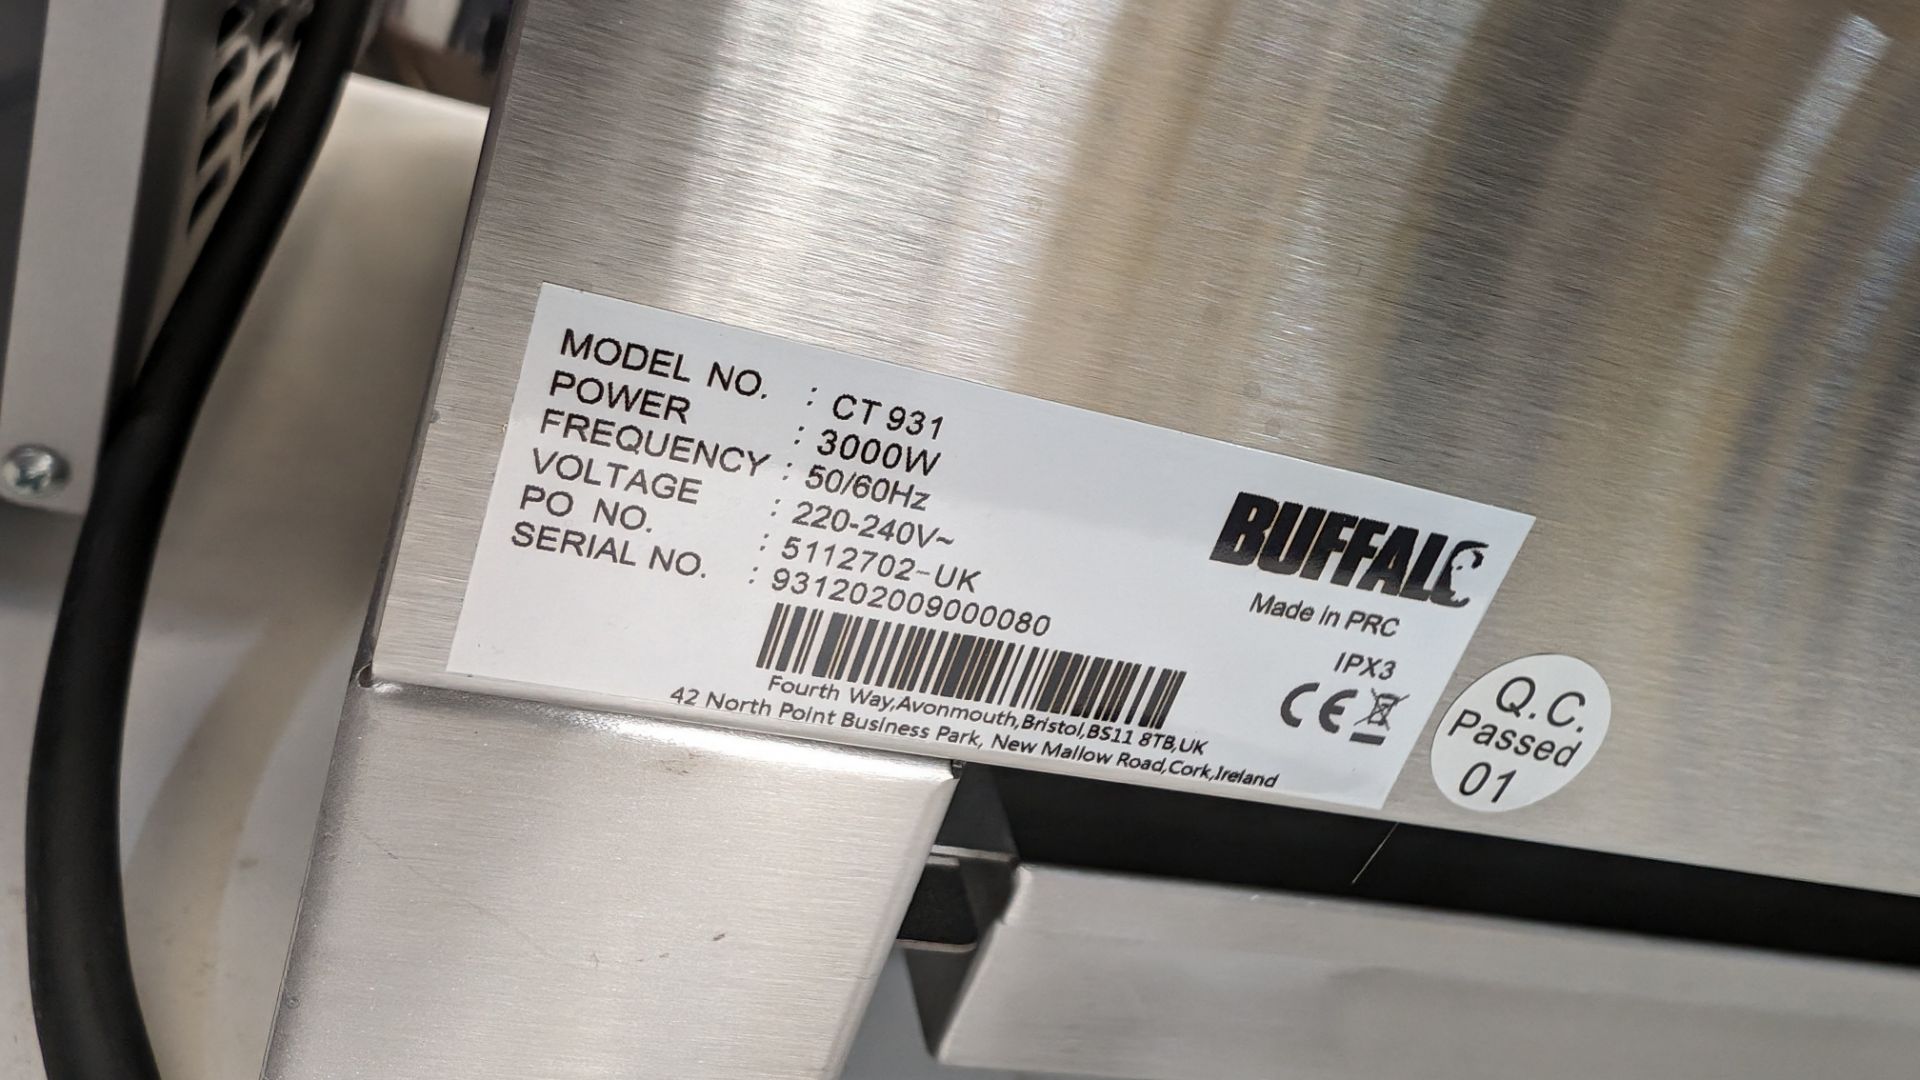 Buffalo stainless steel commercial crepe maker, model CT931 - Image 5 of 5